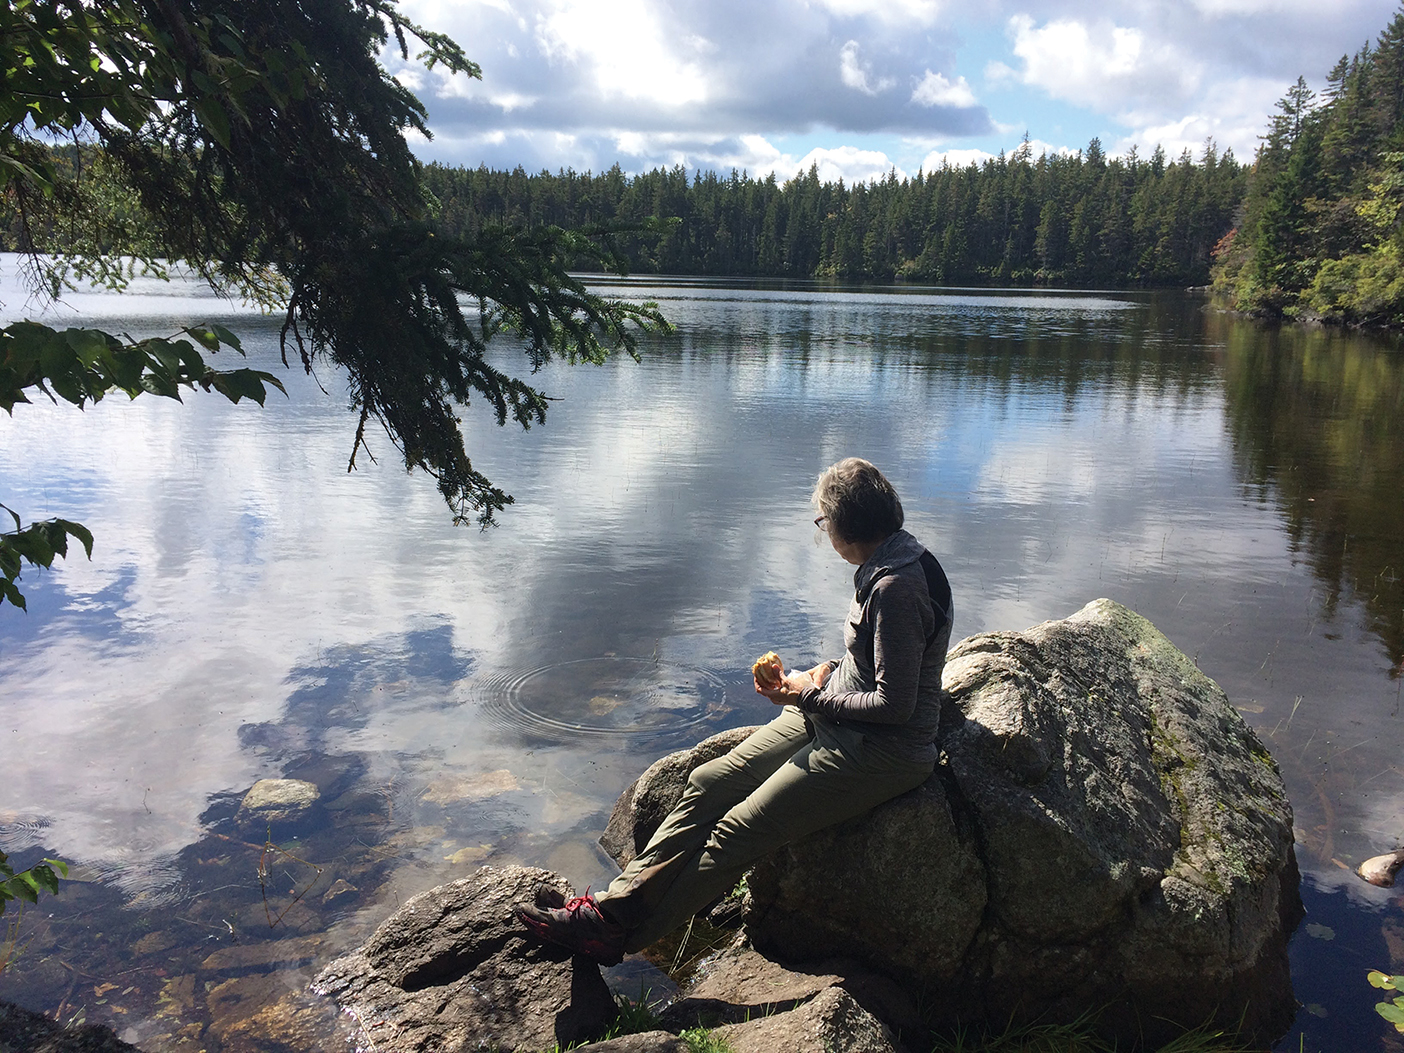 A woman sits on a rock overlooking a lake